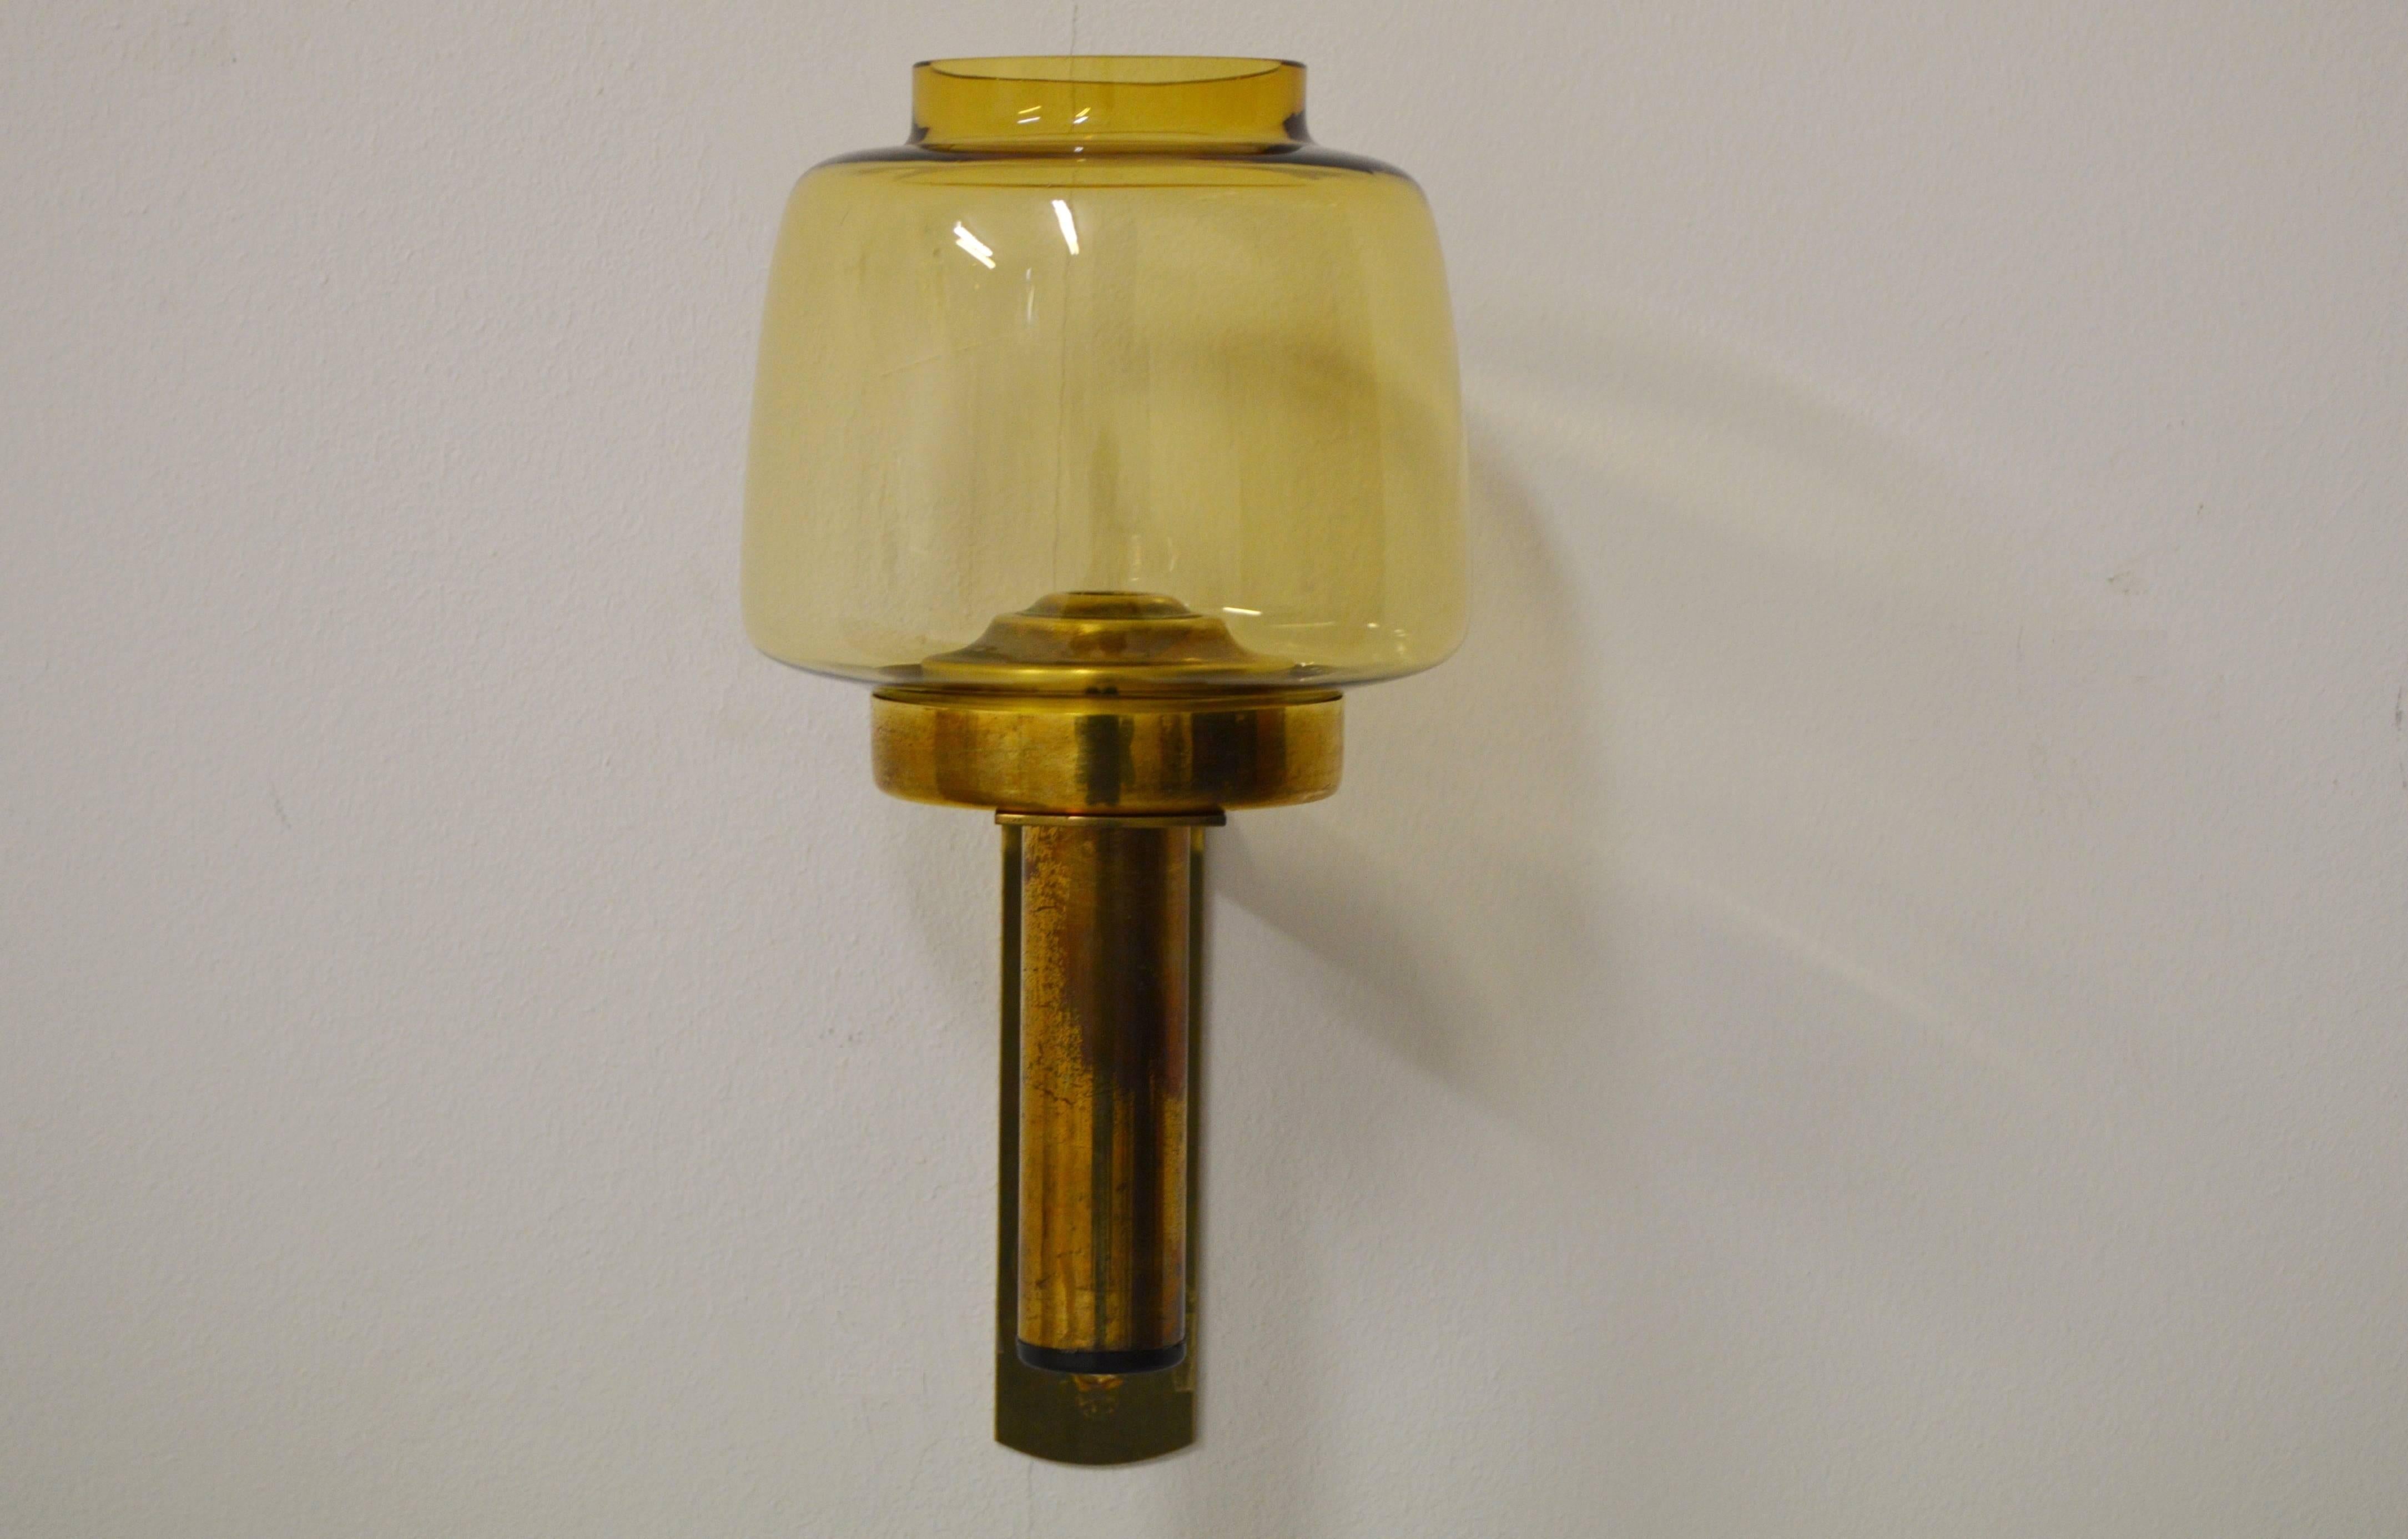 Decorative wall candlestick of brass with cup of handmade glass.
A spring ensures that the light is held in place and only the flame comes out.
Original producer label in bottom.
Design by Hans-Agne Jakobsson, Sweden.